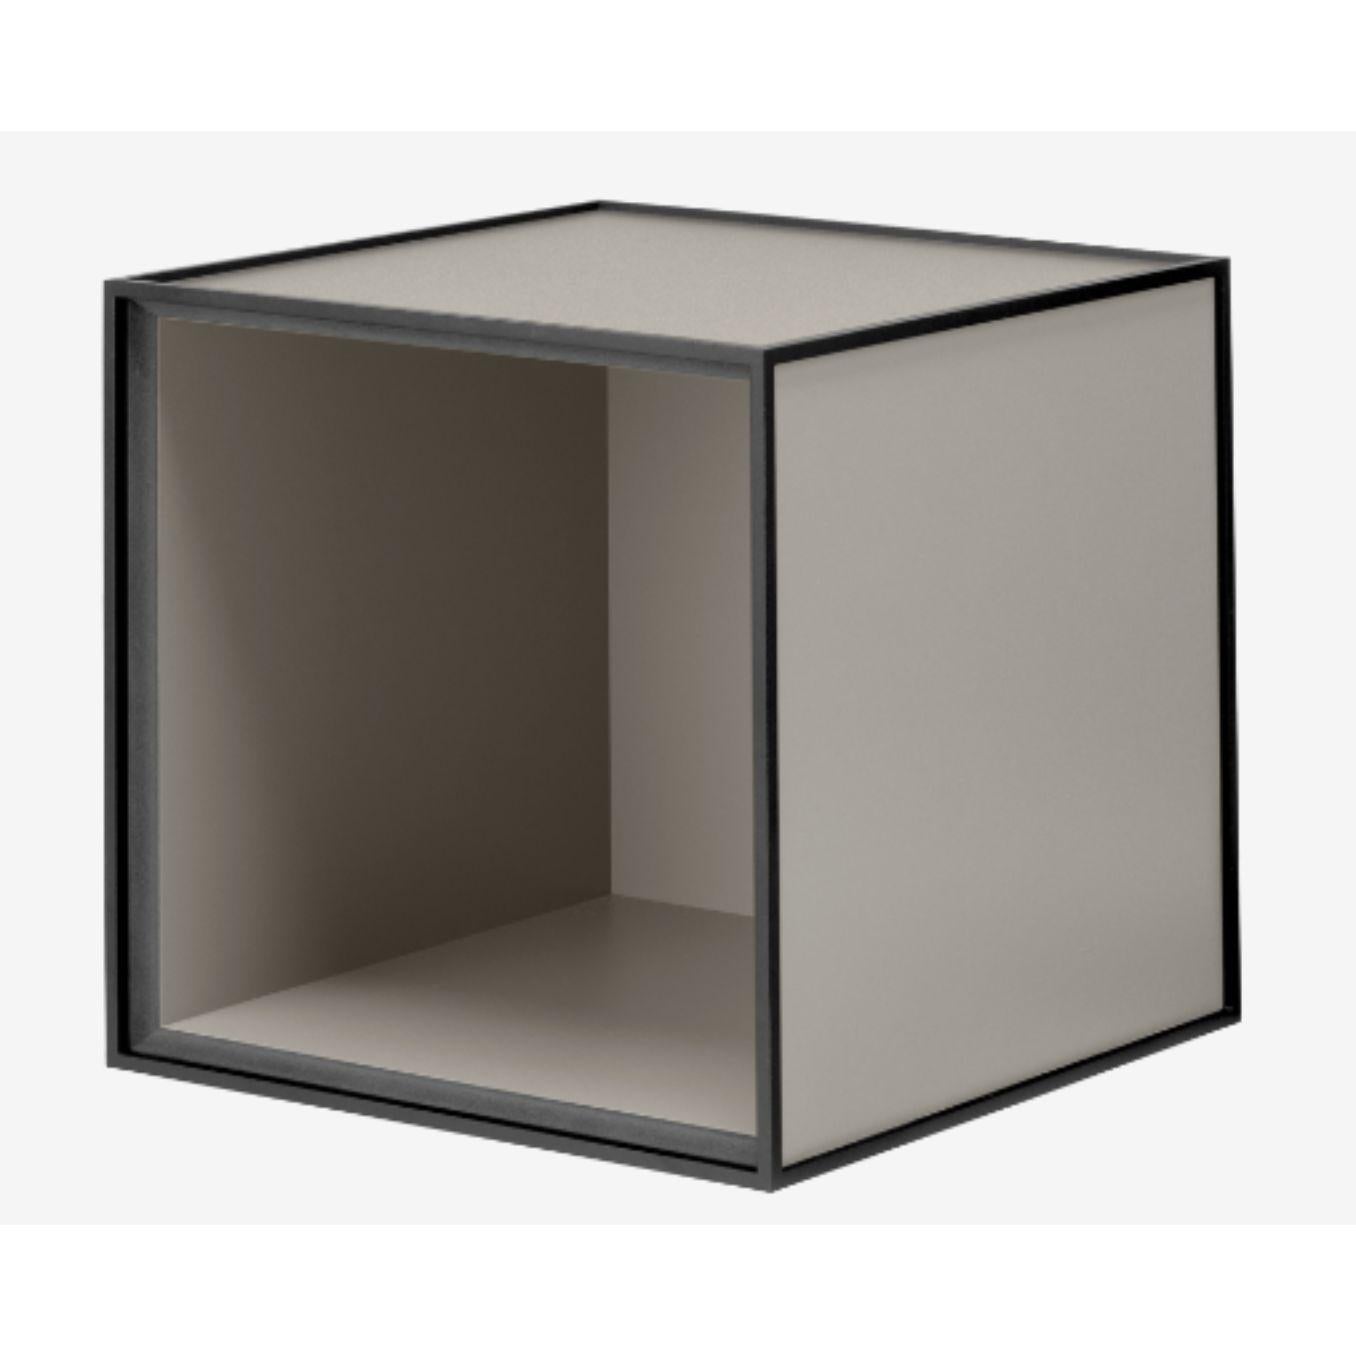 28 Sand frame box by Lassen.
Dimensions: W 28 x D 28 x H 28 cm 
Materials: finér, melamin, melamin, melamine, metal, veneer, oak
Also available in different colors and dimensions. 

By Lassen is a Danish design brand focused on iconic designs